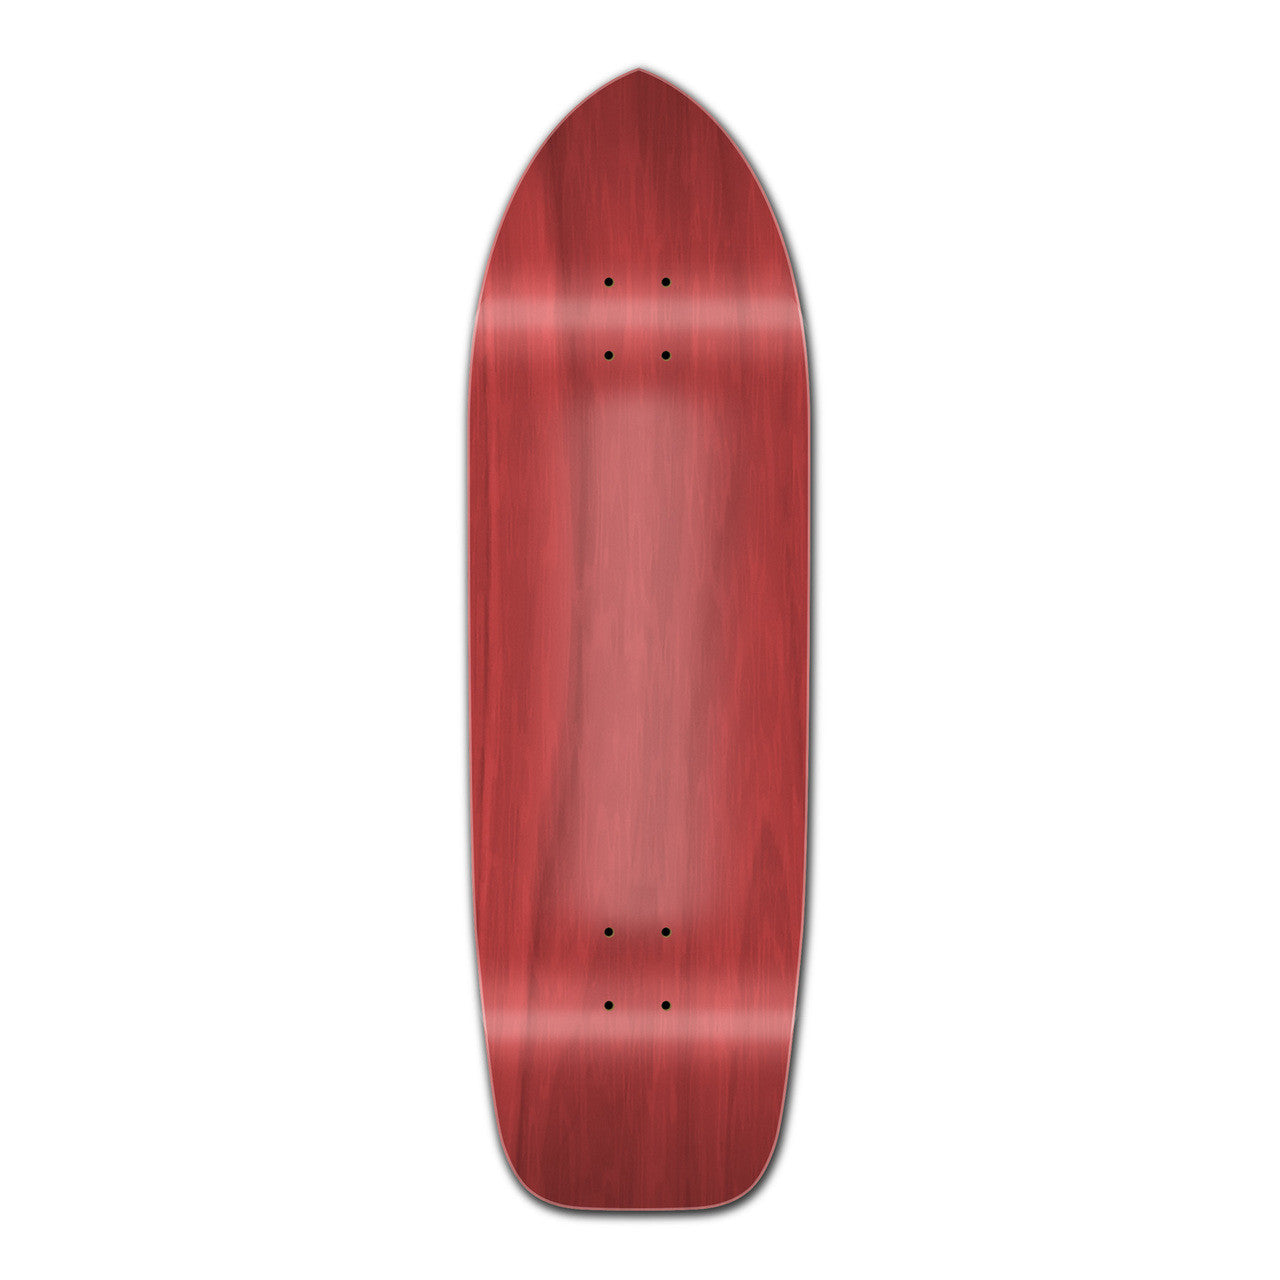 Yocaher Old School Longboard Deck - Stained Red